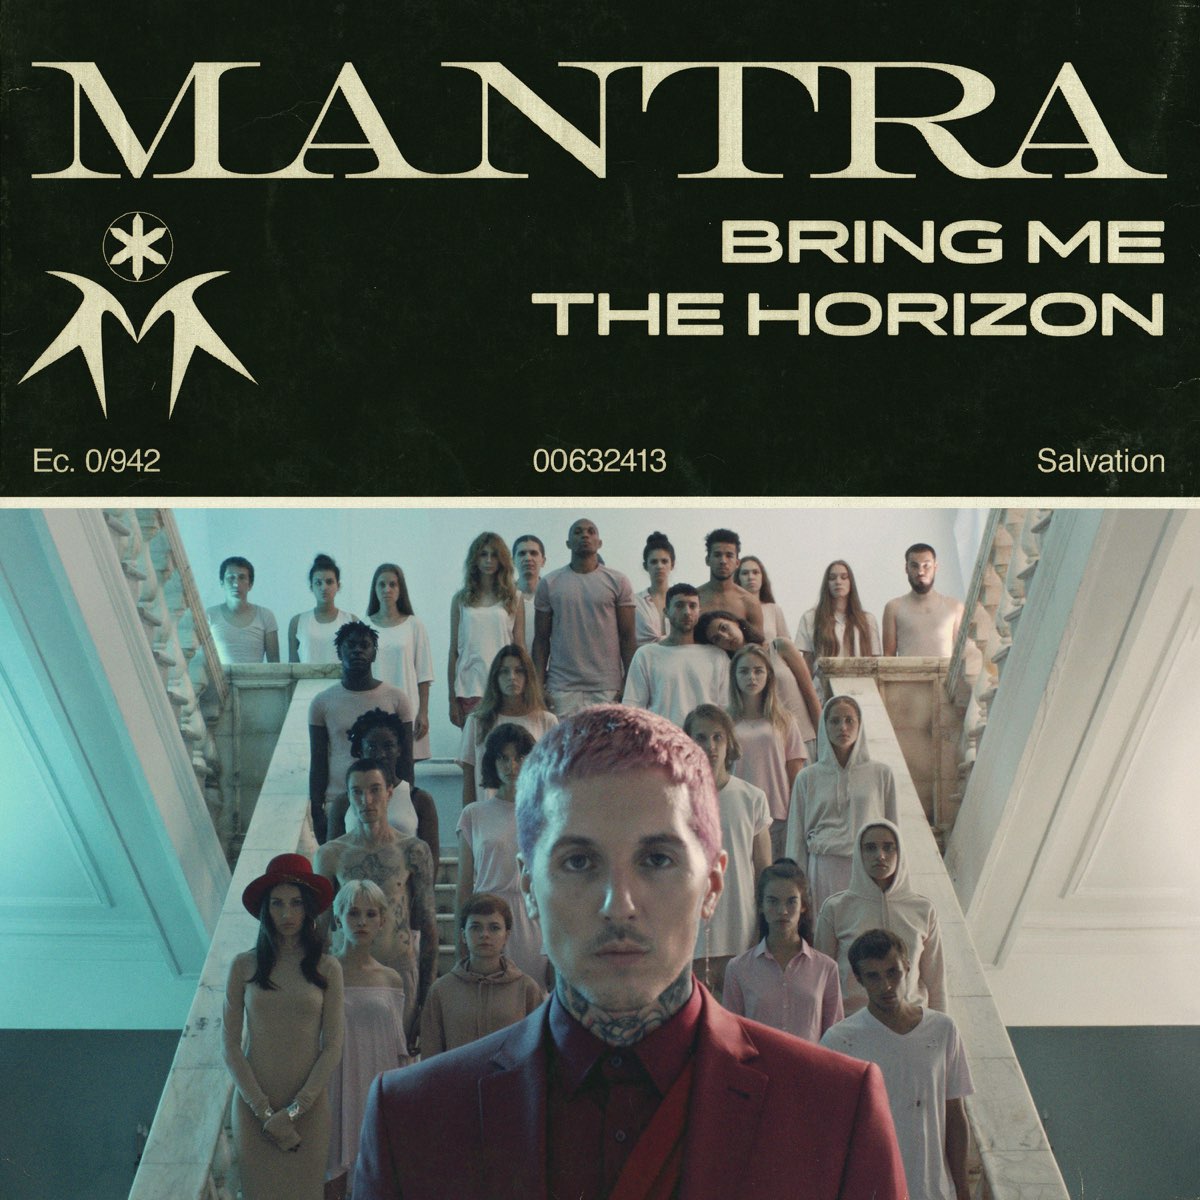 Bring the song. Bmth Mantra. Bring me the Horizon Mantra. Bring me the Horizon мантра. Mantra bmth обложка.